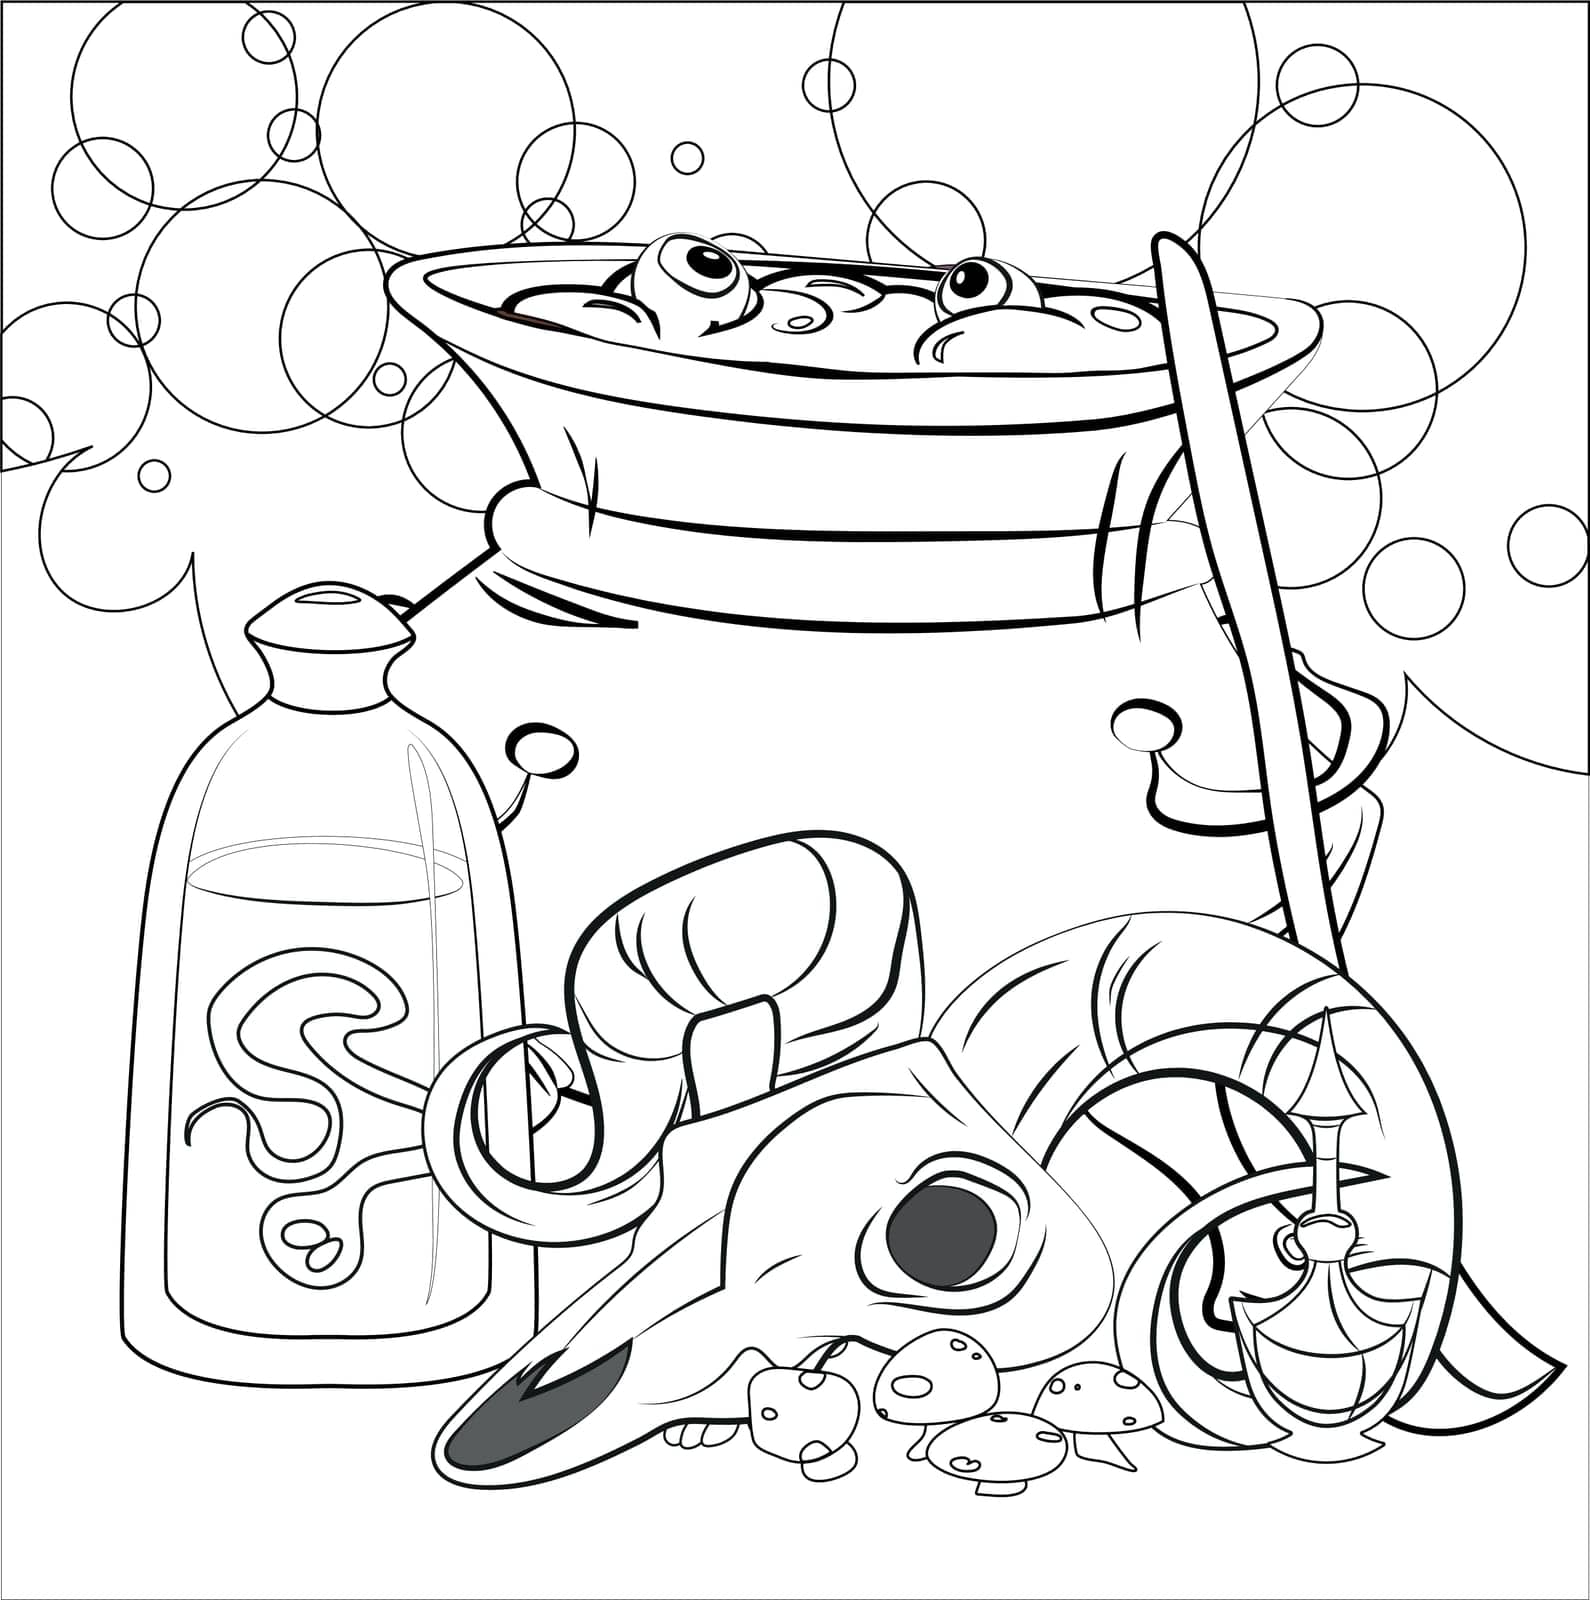 Trick or Treat coloring page by milastokerpro